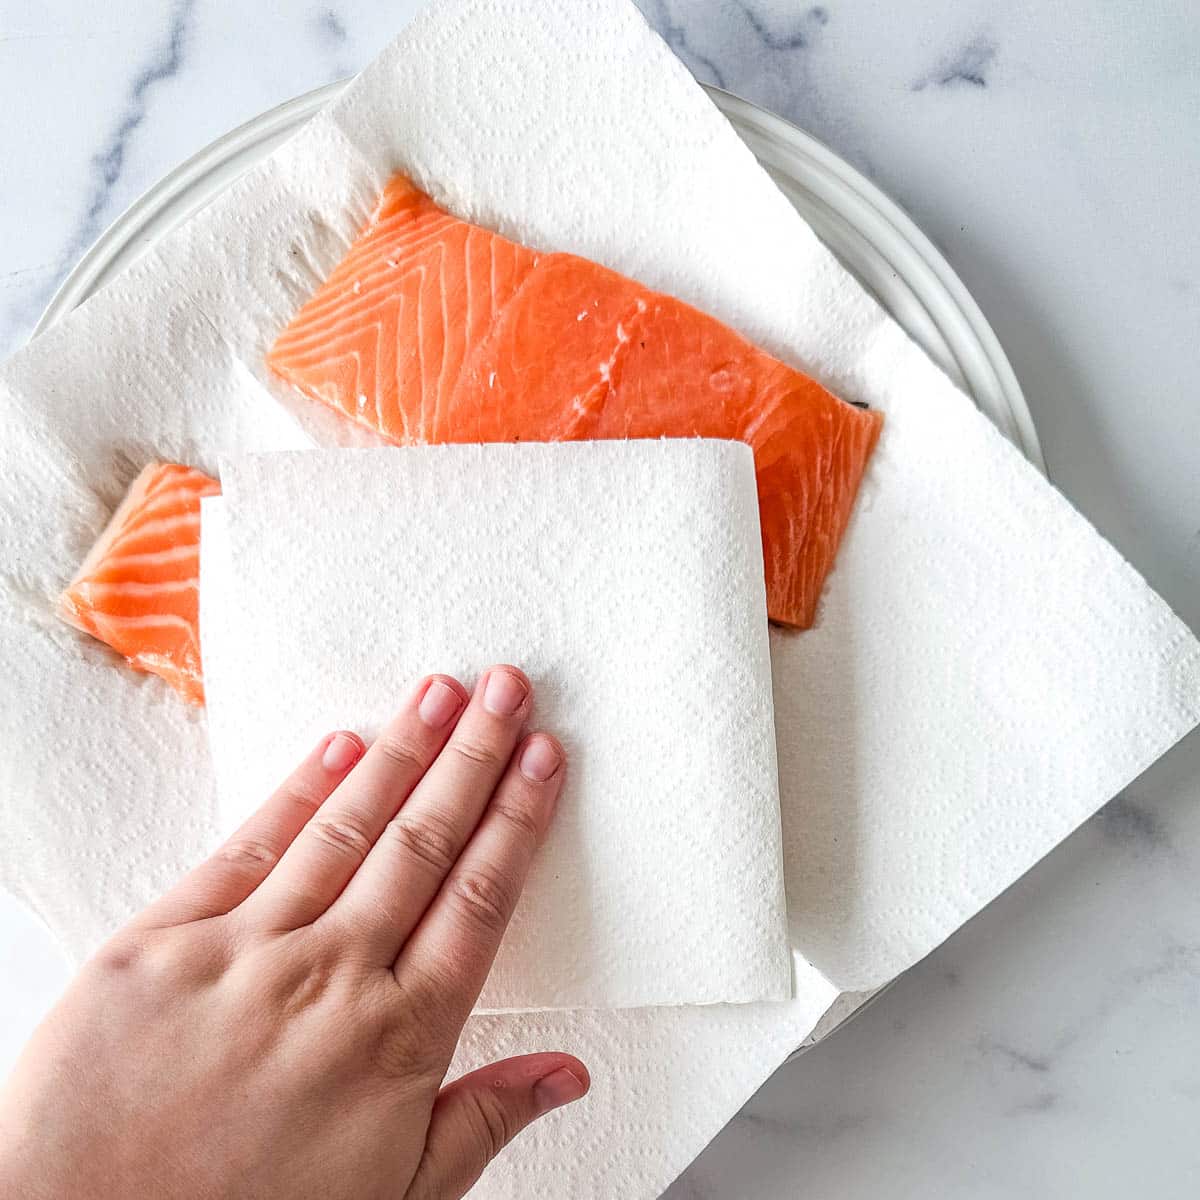 A person patting salmon dry with paper towels.